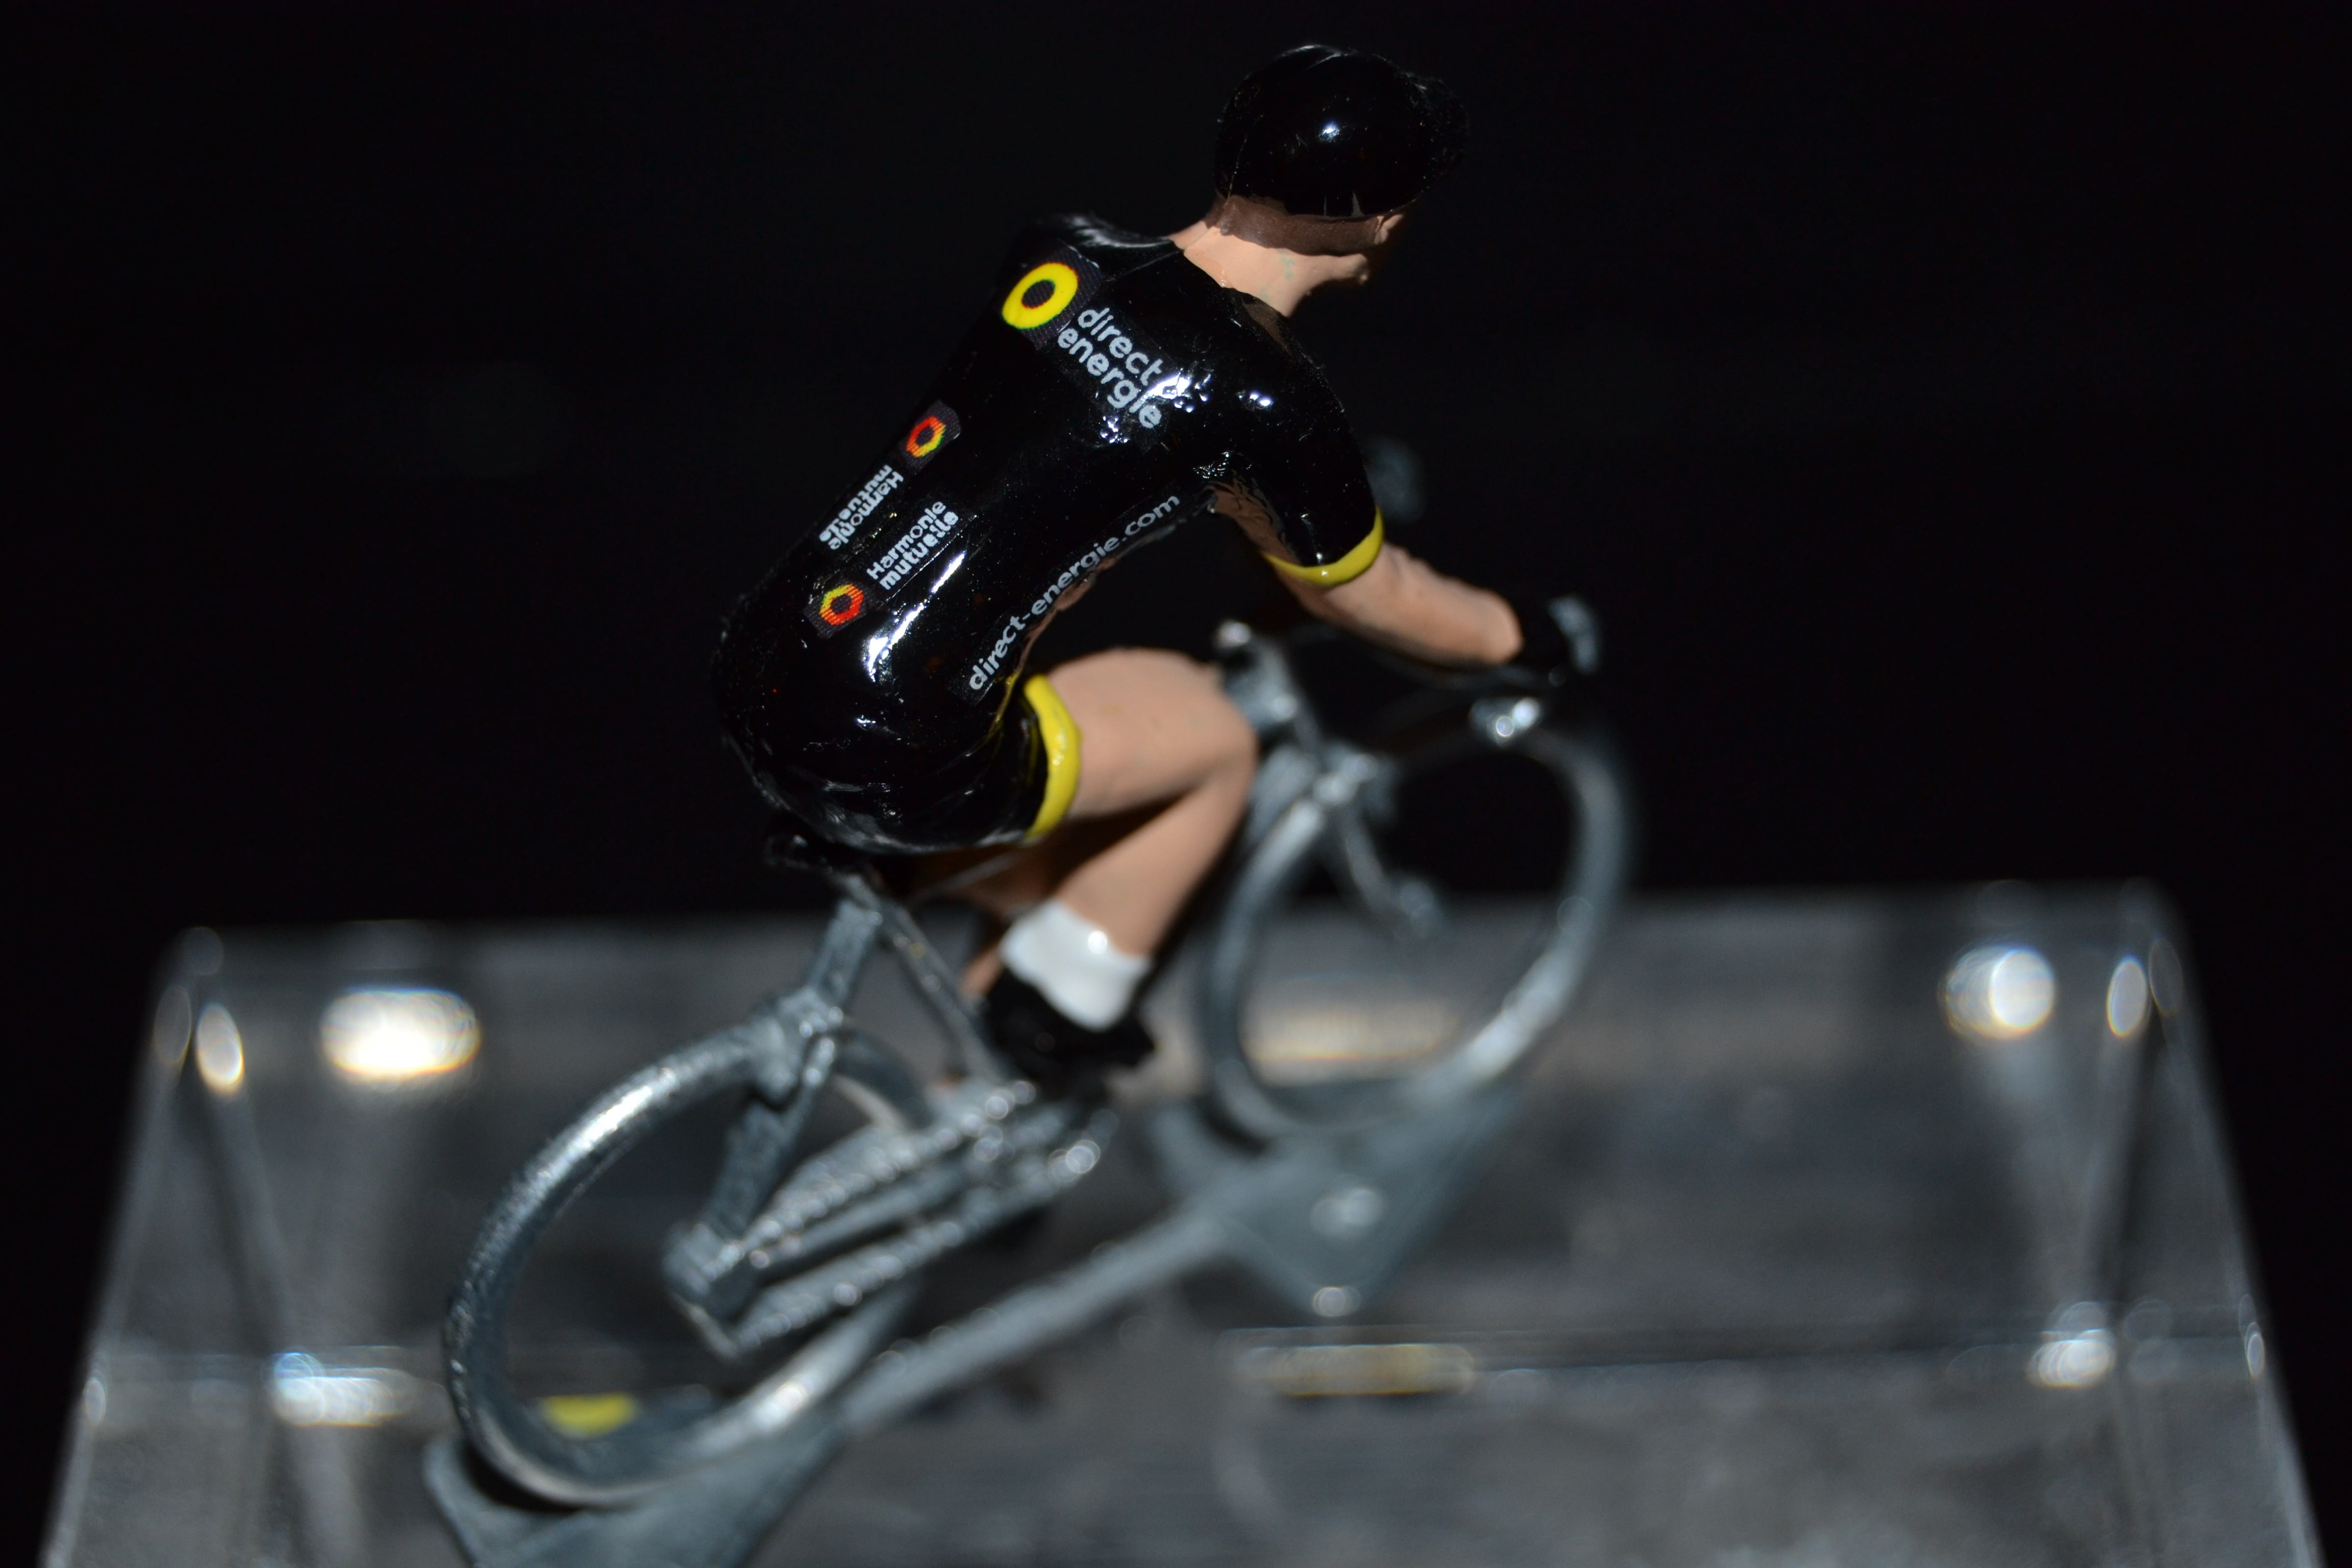 Direct Energie 2017 - Metal cycling figure - Petit cycliste